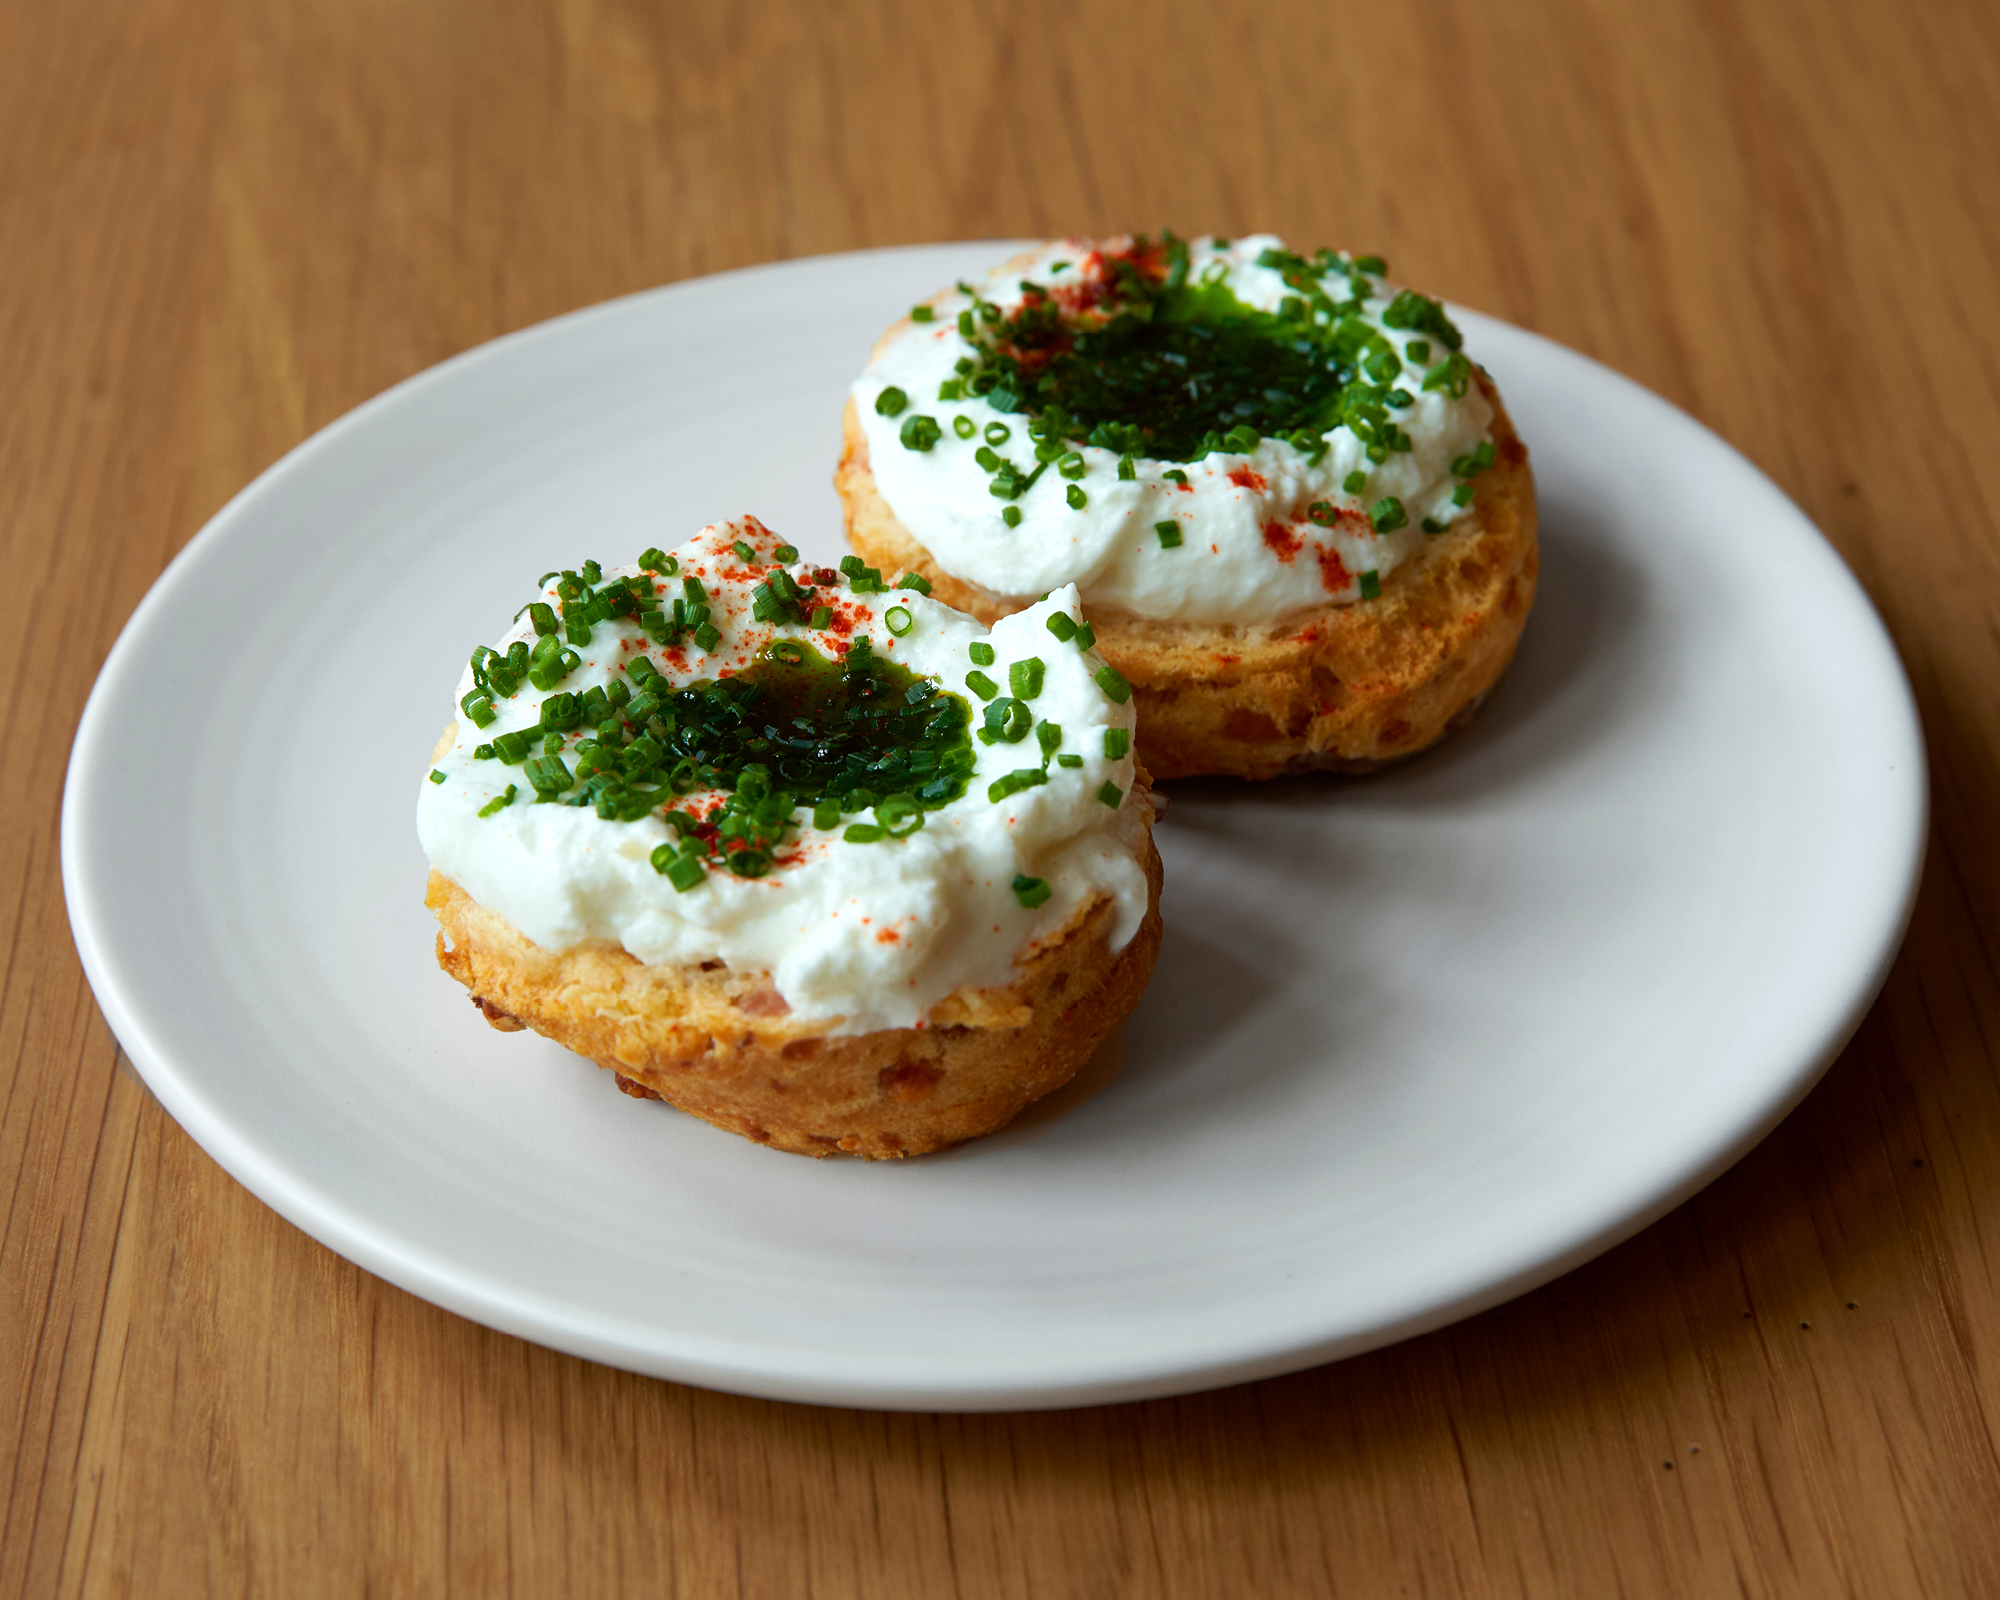 Bacon Scones with goats curd and chives